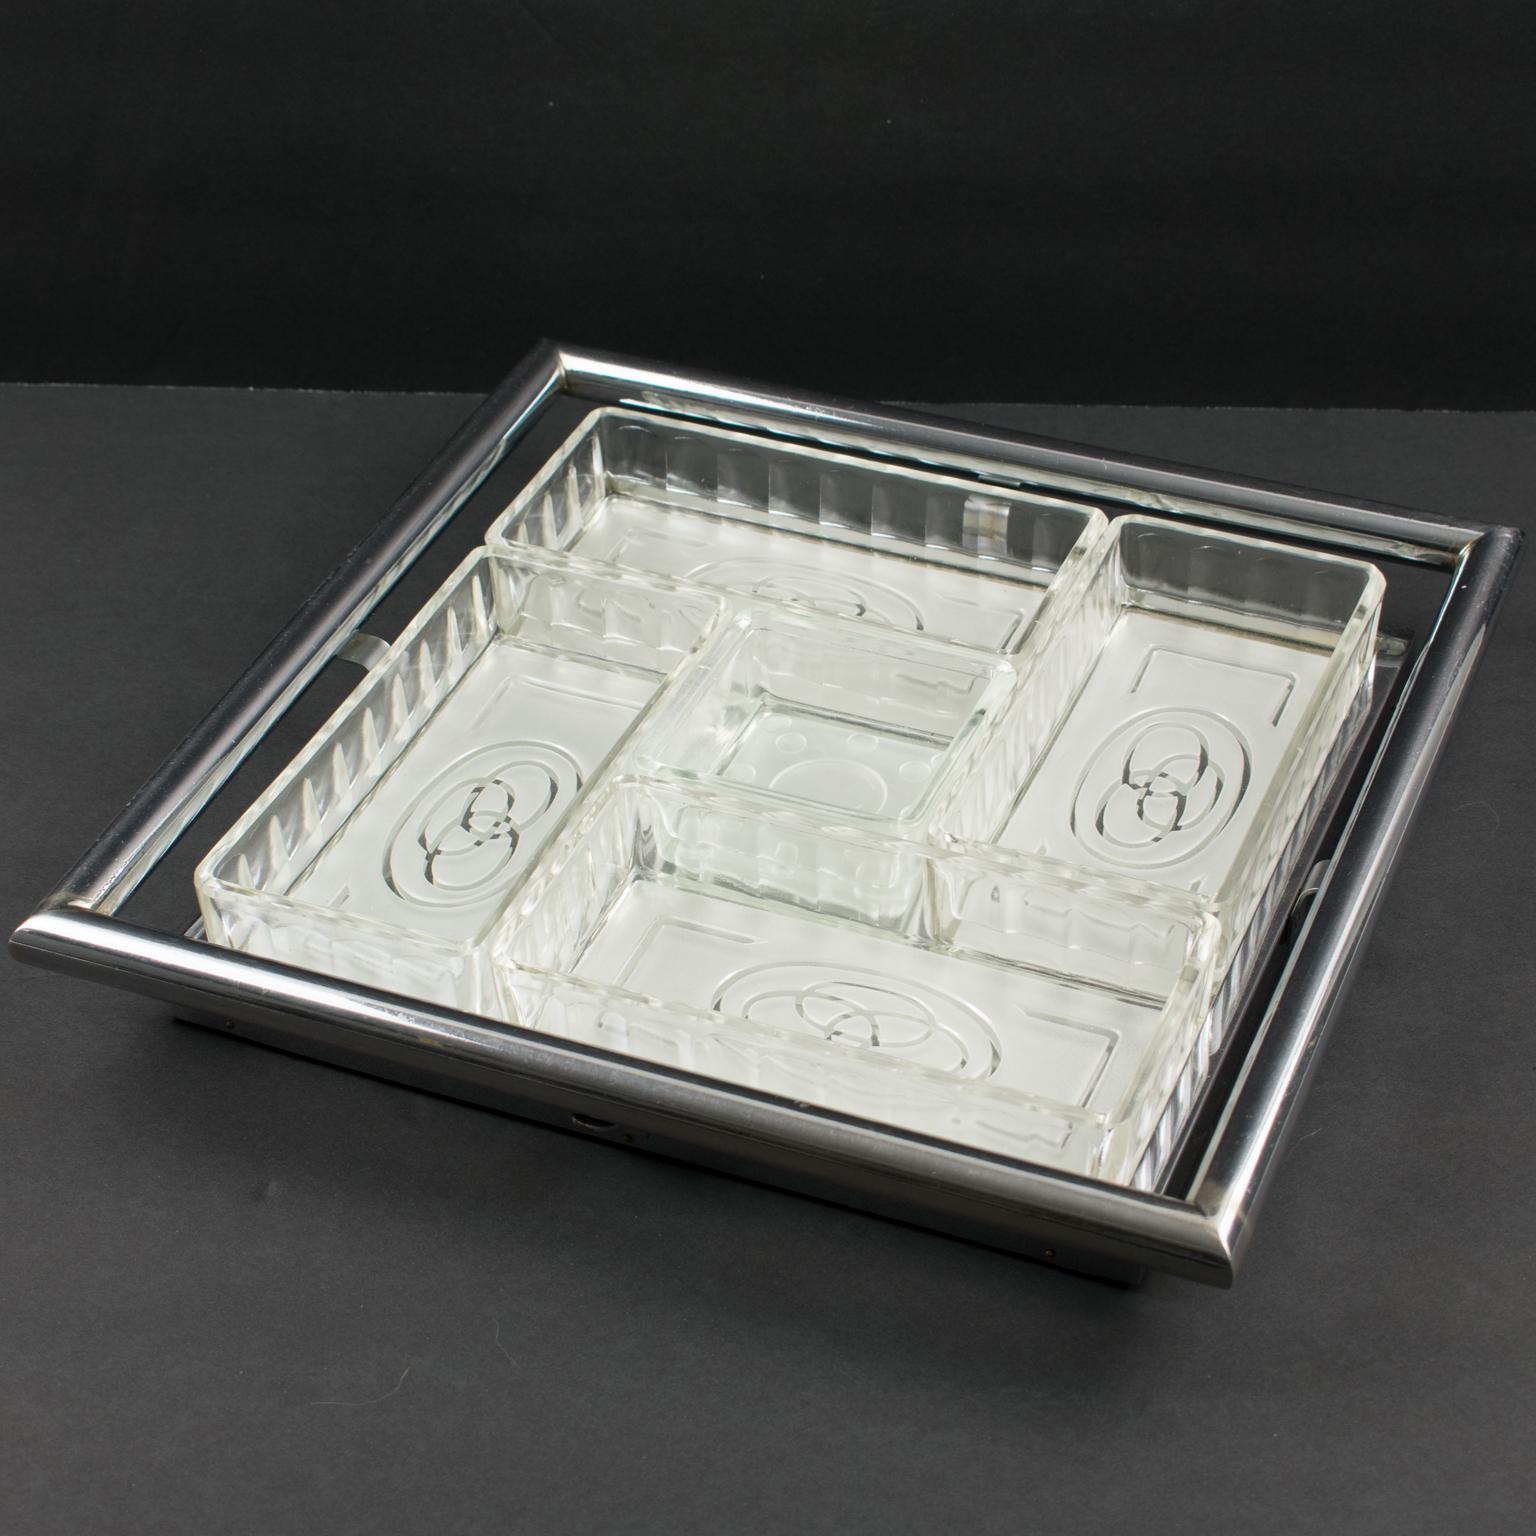 Lovely French Art Deco barware serving set for hors d'oeuvres, cocktail, snacks or appetizers. Square shape, featuring a mirrored glass serving tray with chrome gallery. Five serving dishes for vegetables, olives or nuts, in molded-glass with an